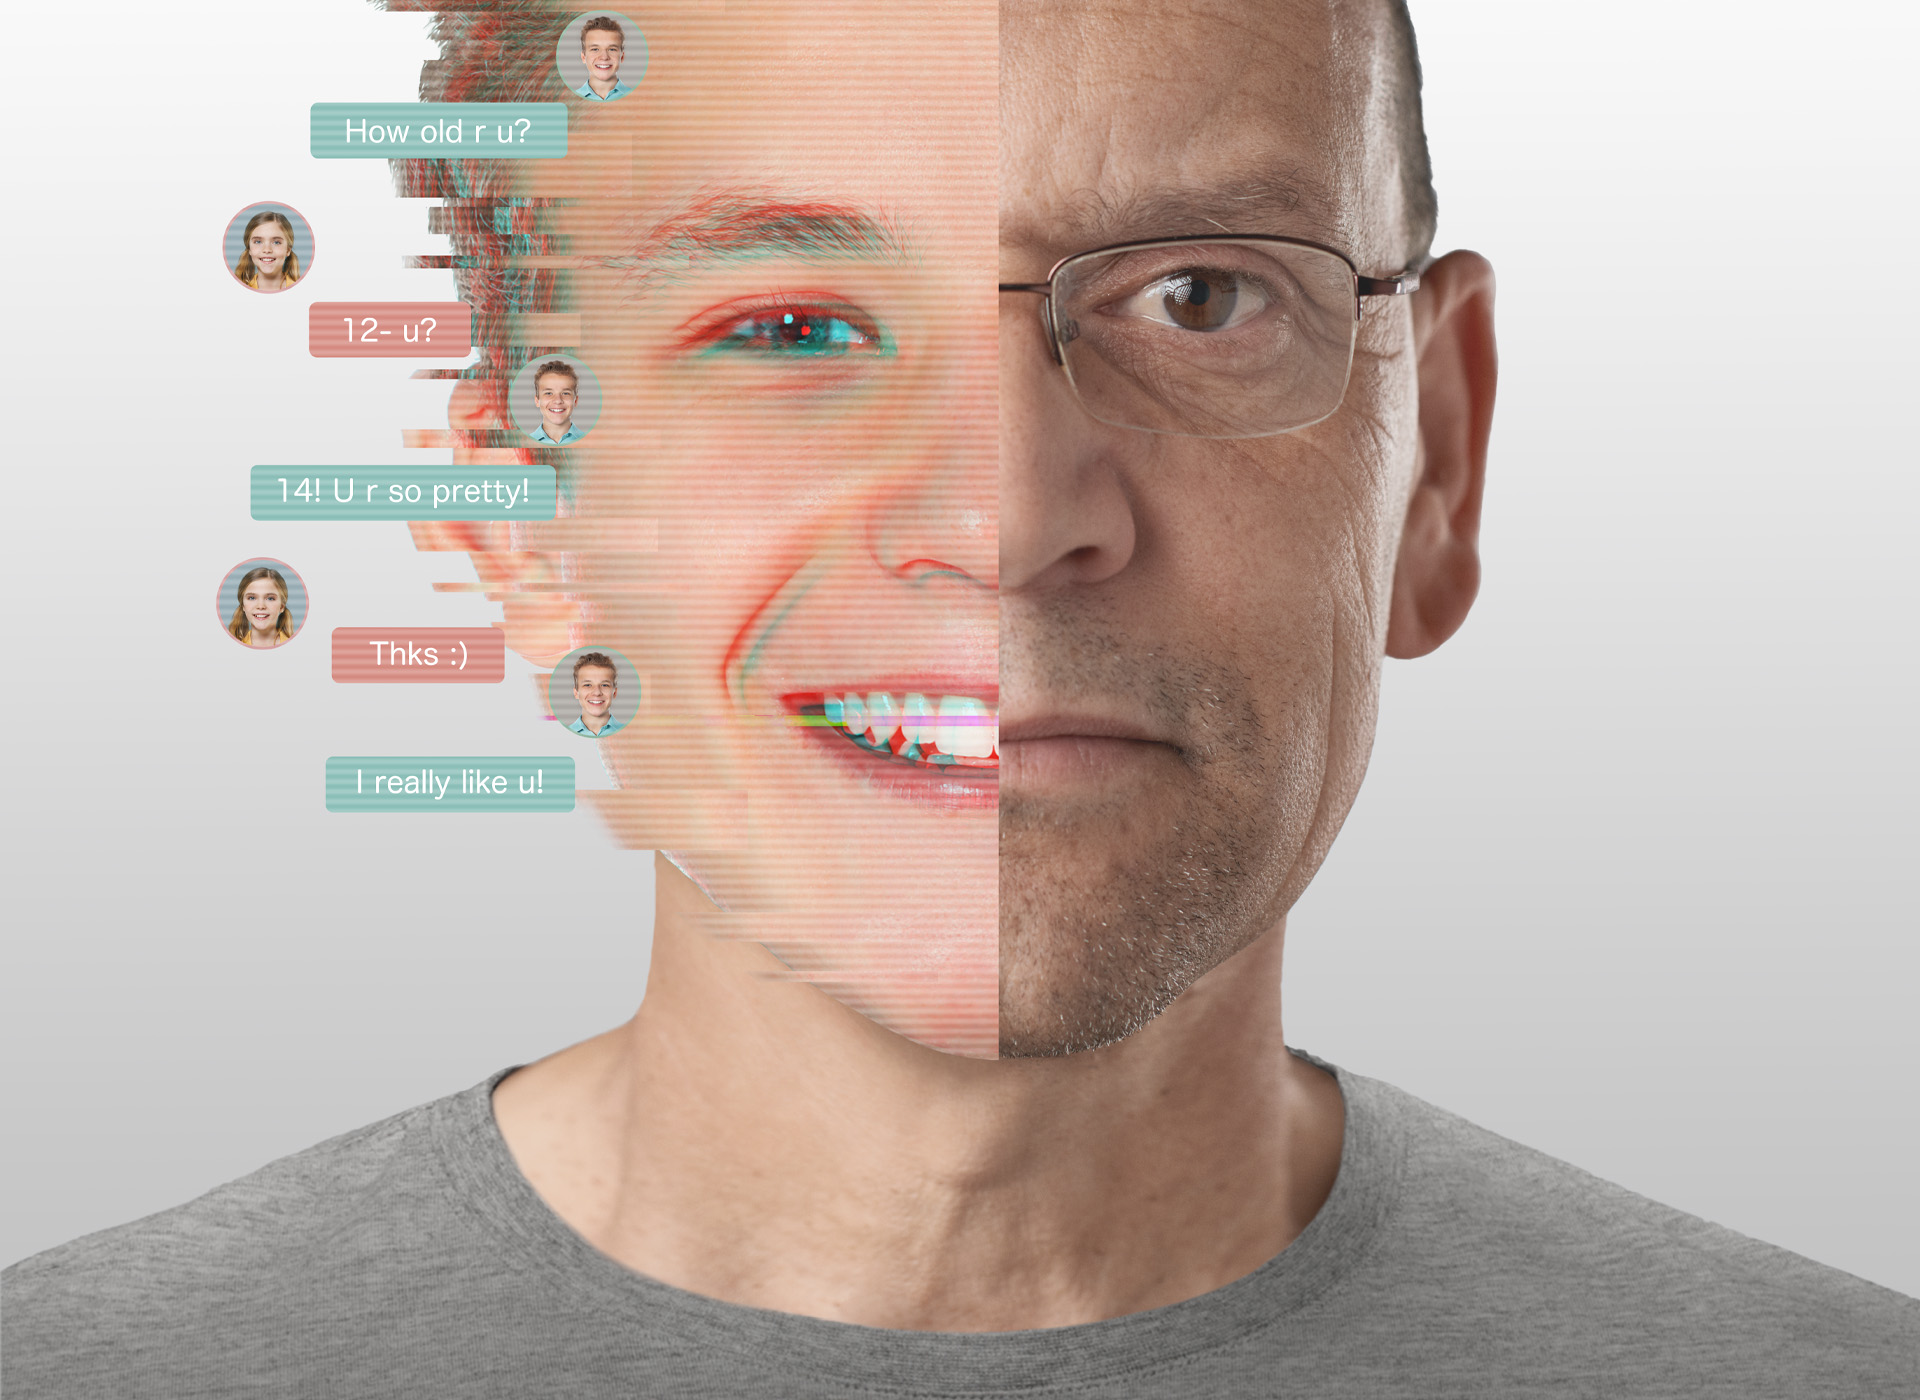 composite of person and text